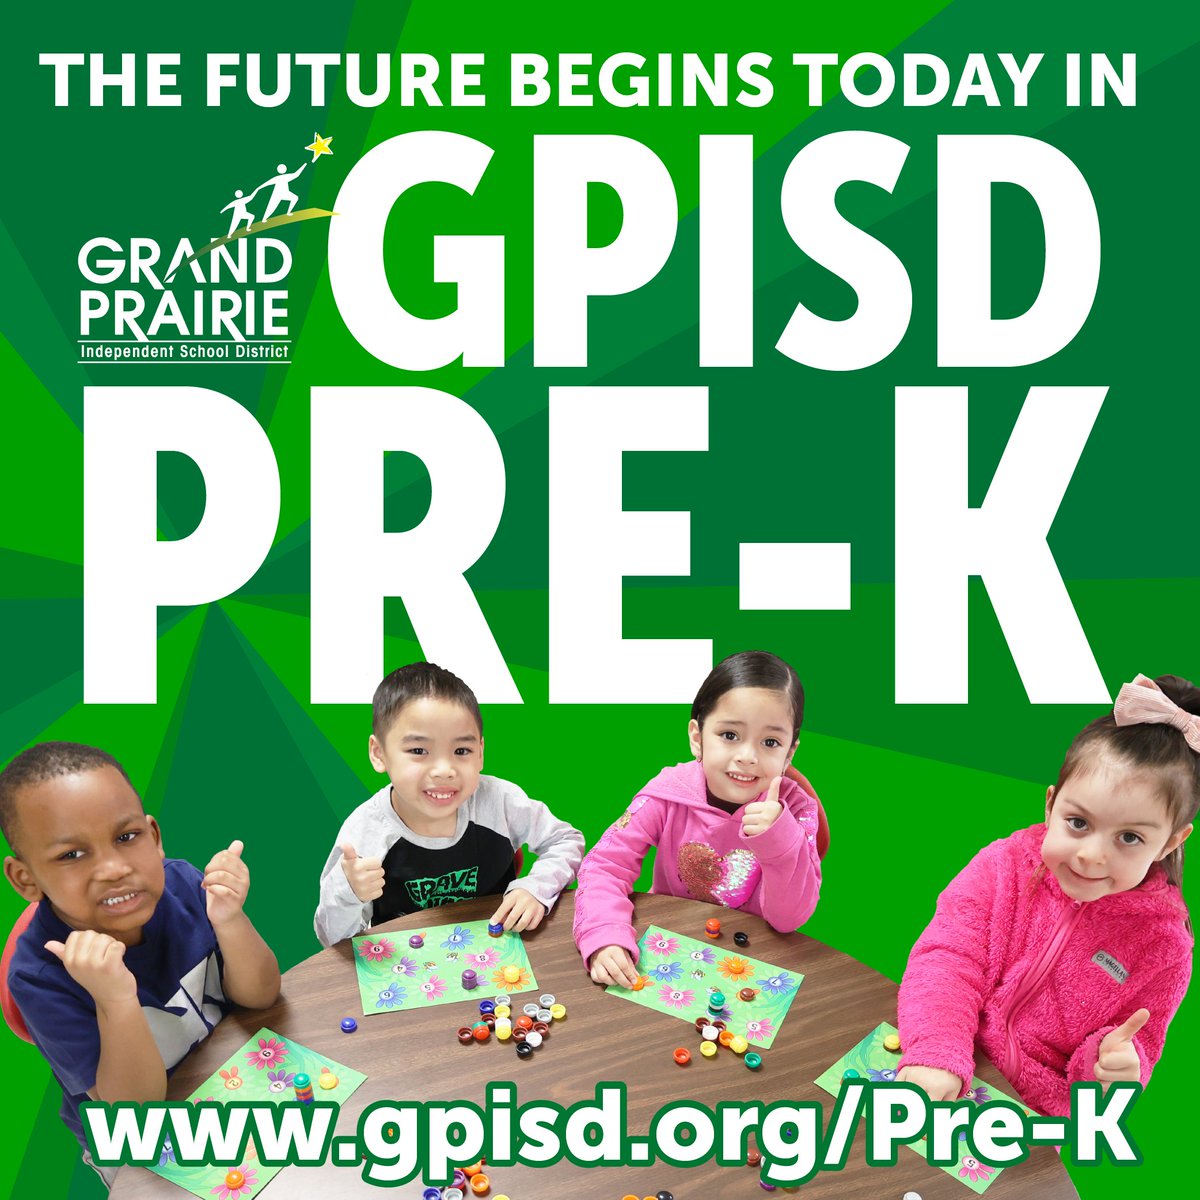 There’s still time! If your child turns 3 or 4 years old by Sept. 1, it’s time to begin the GPISD new student Pre-K registration process for the 24-25 school year. Visit gpisd.org/Pre-K to learn more about the application and enrollment process.